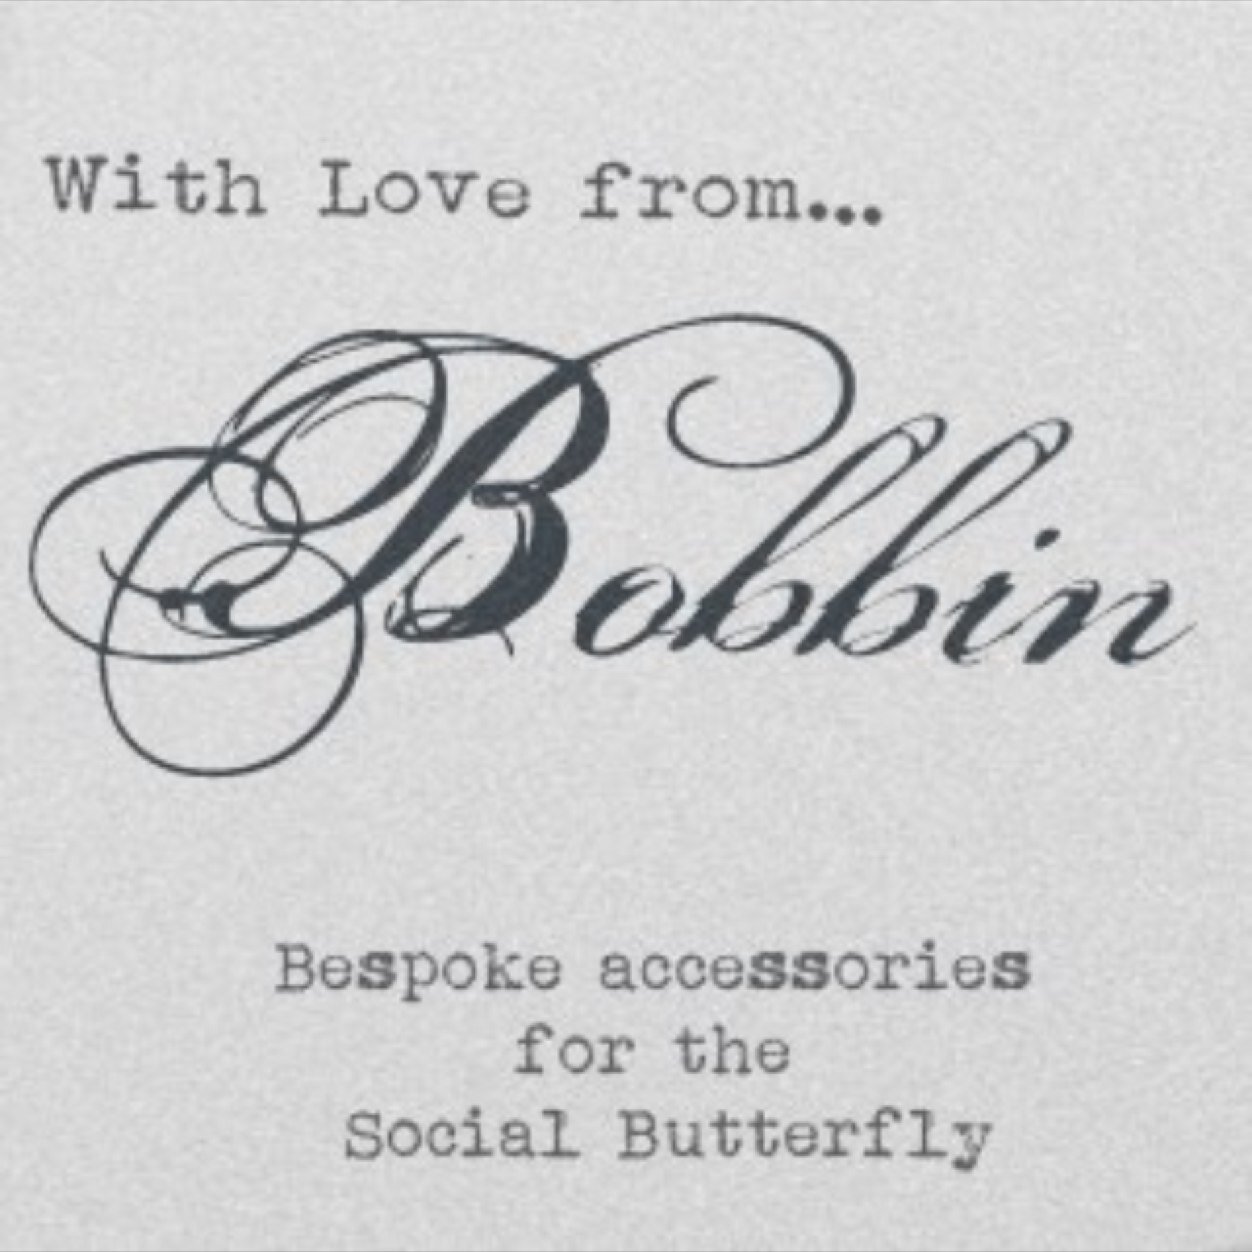 With Love from Bobbin is a beautiful range of handmade accessories that take inspiration from the days of old, when glamour was simply exquisite!